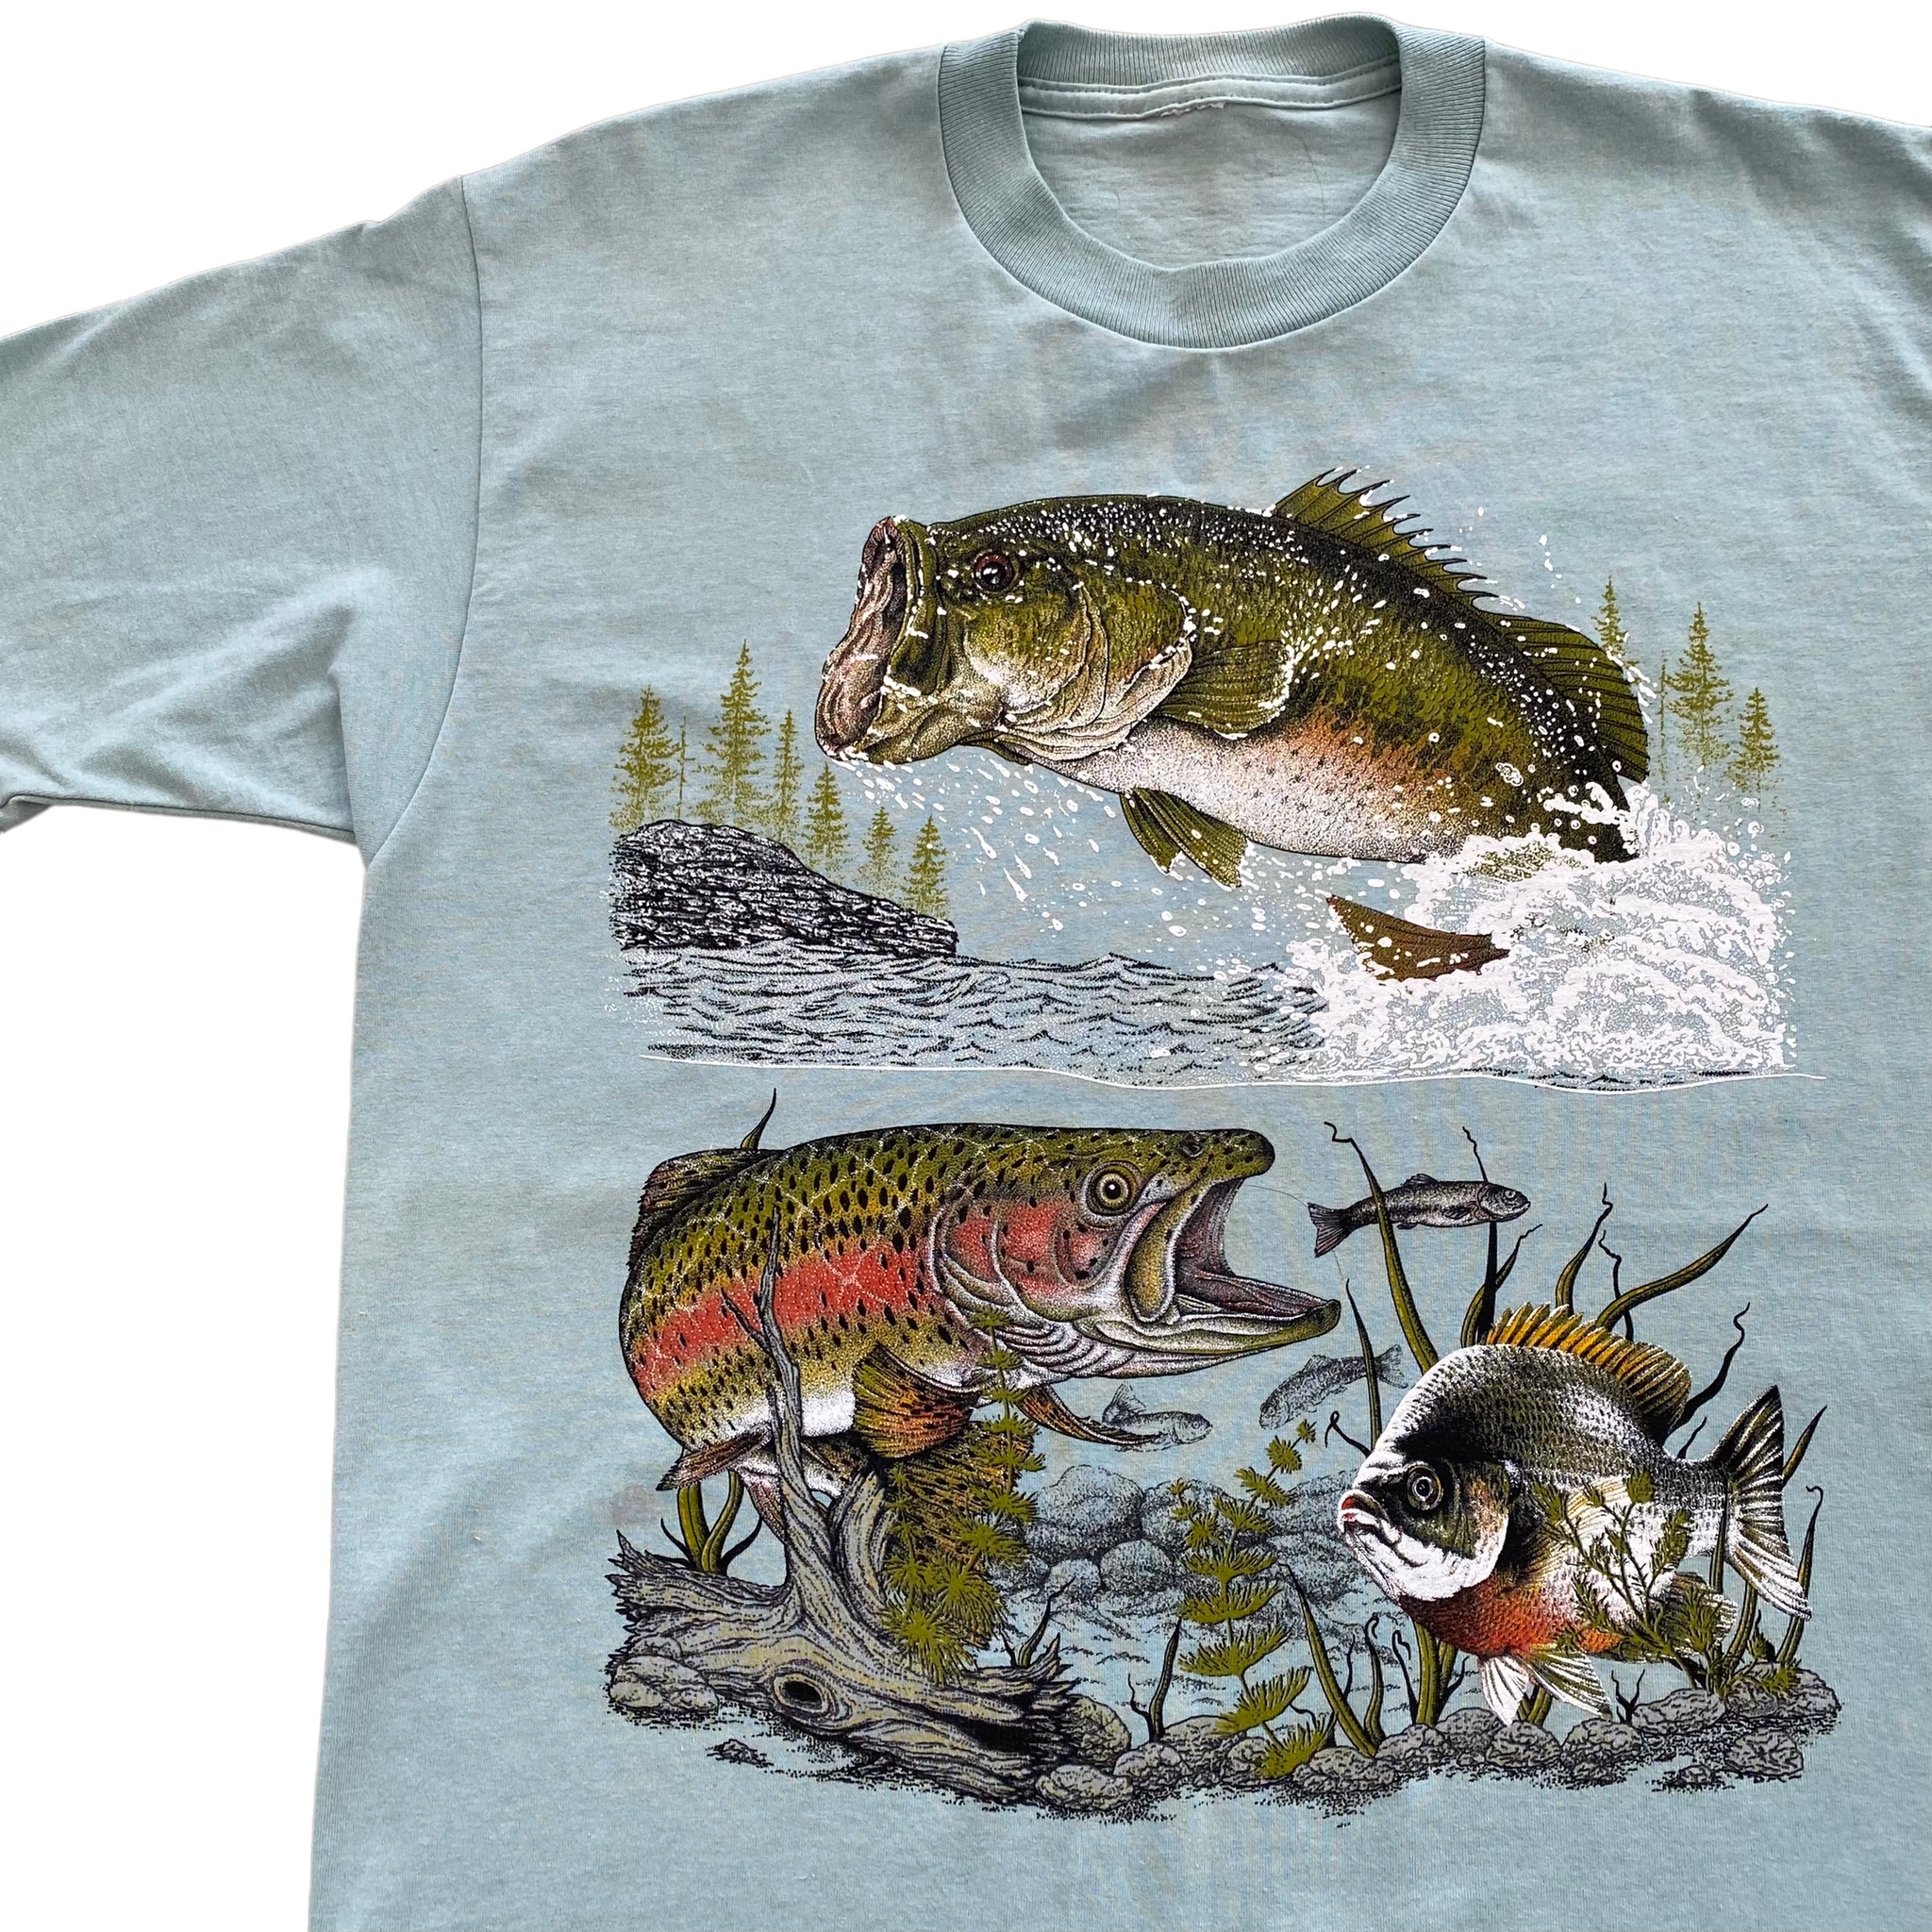 90s BASS. TROUT. Sunfish tee large